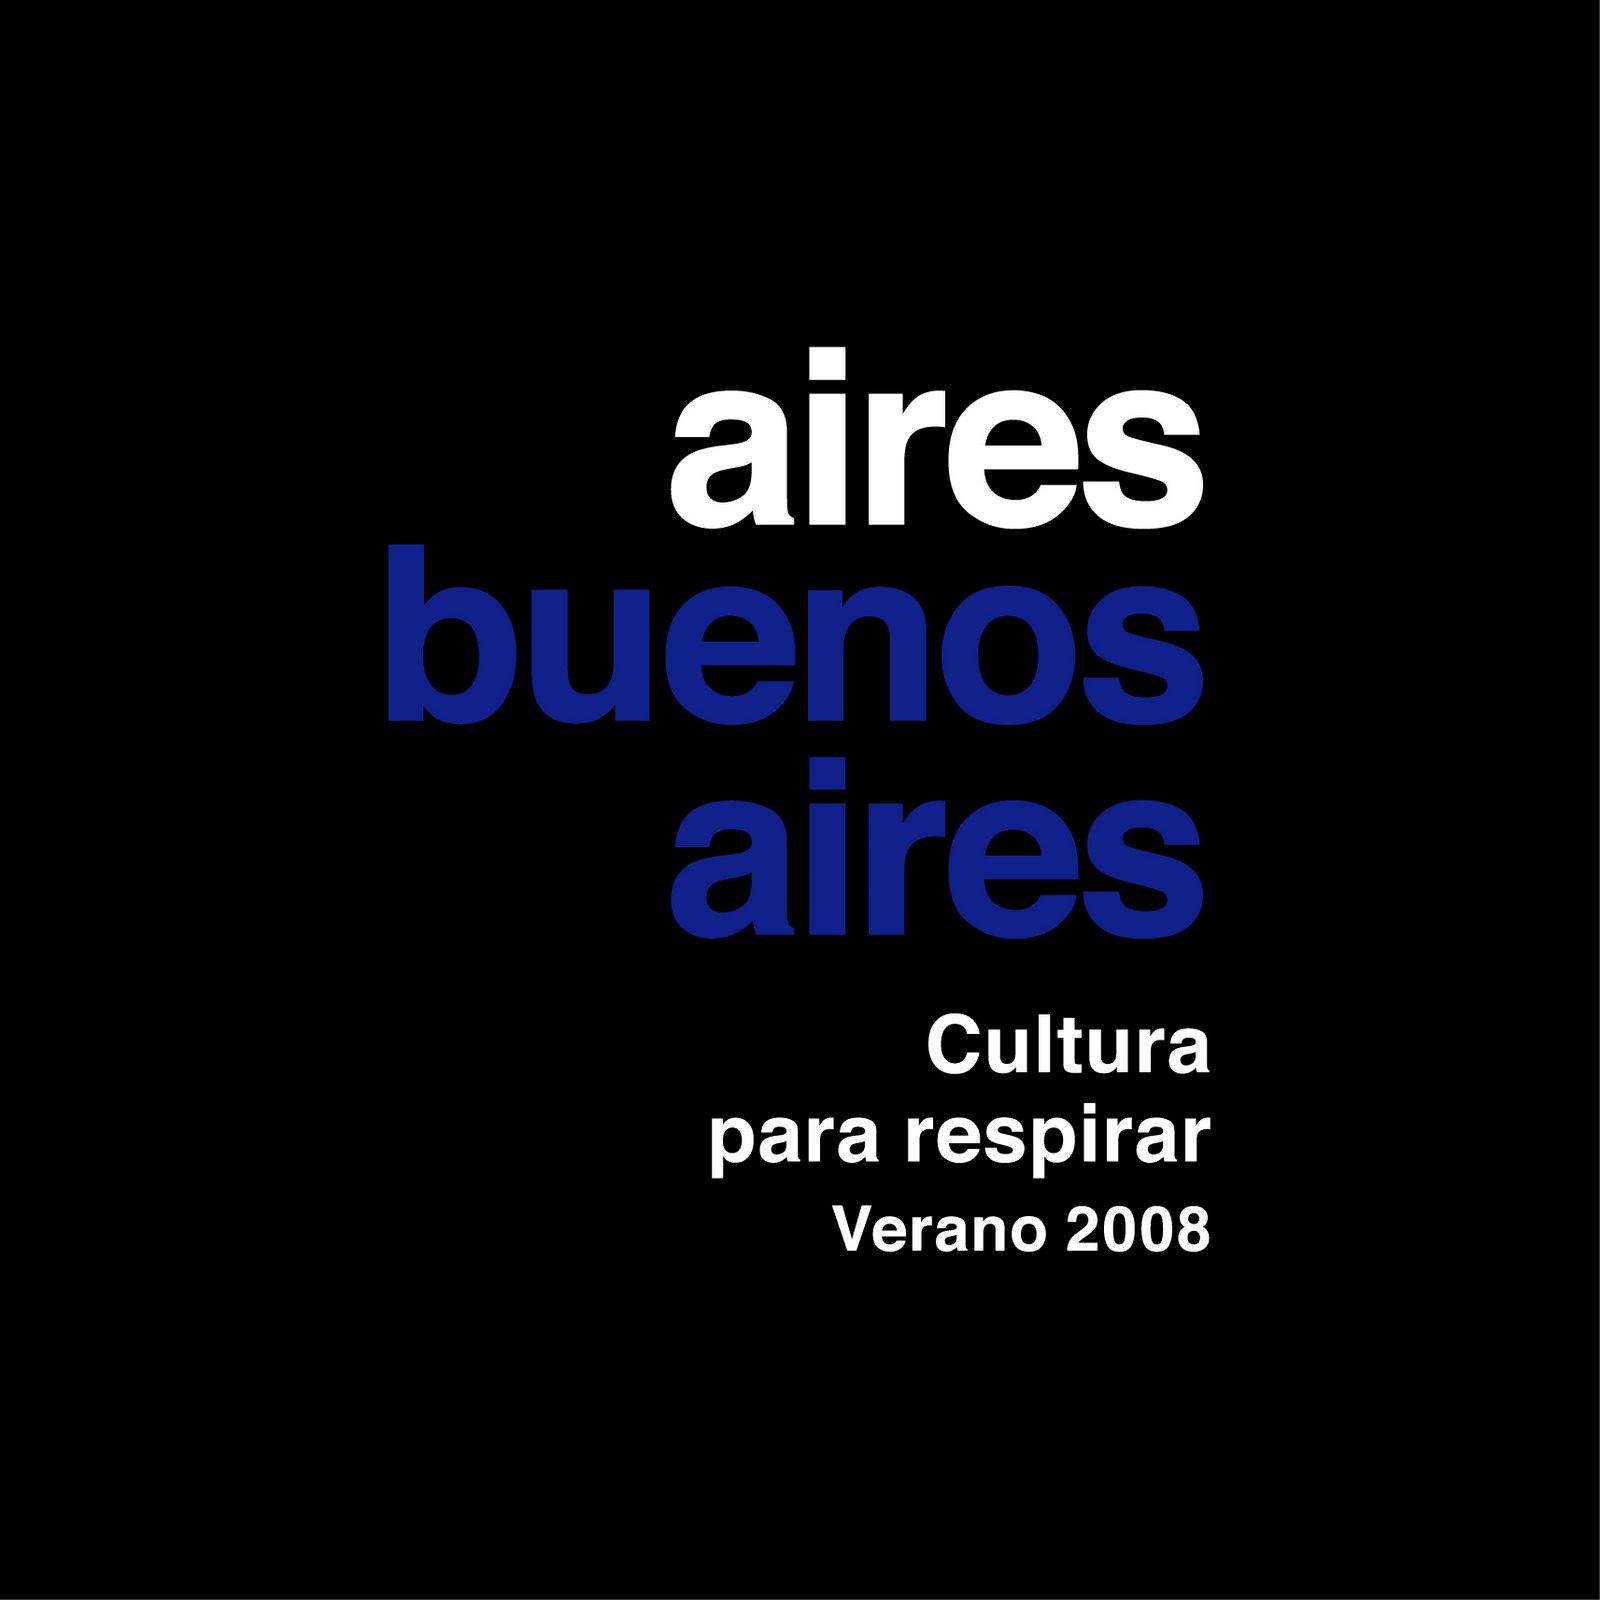 [logo_aires_buenos_aires.jpg]